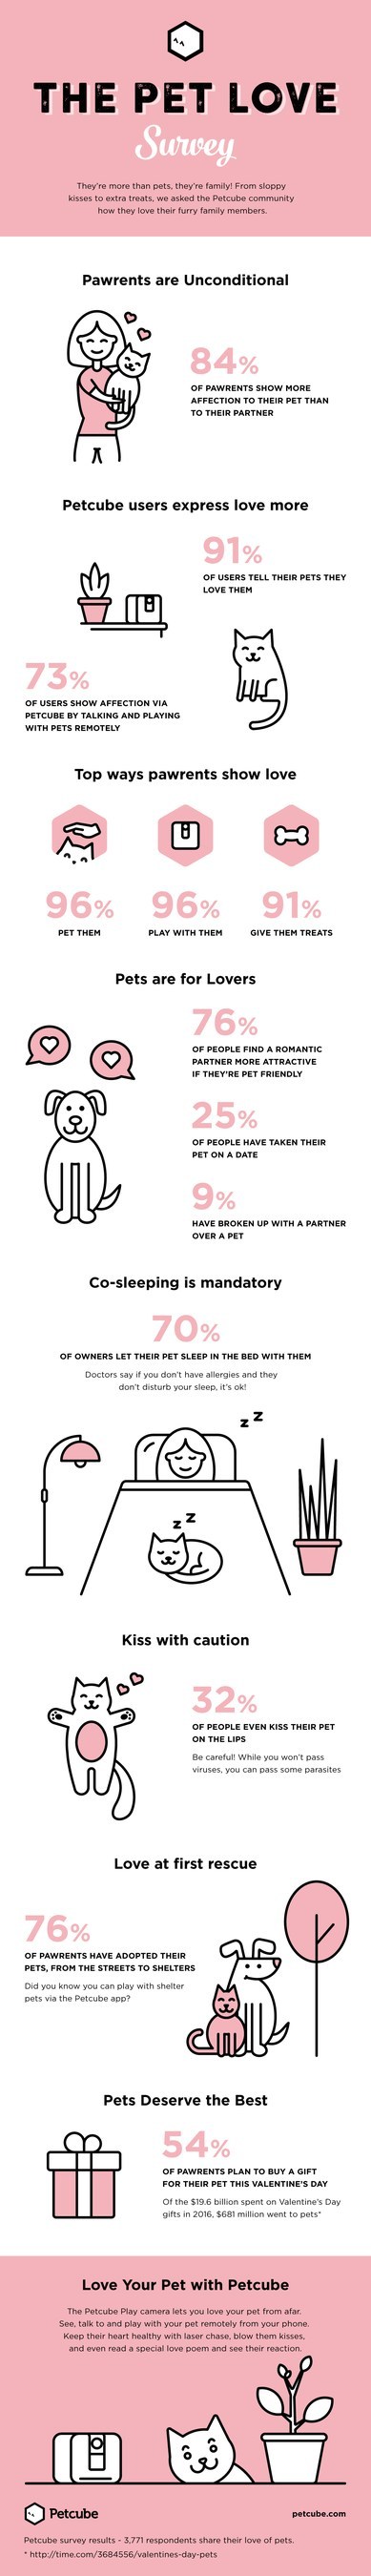 Pets are loving parts of the family! But how much do we show them love? How important are they to our relationships? Petcube found out with its first-ever survey of pet love! This infographic presents results, including that 84% of people show their pet more love than their romantic partner, 54% of people plan to buy their pets a gift for V-Day, and 76% of people find a romantic partner more attractive if they're pet friendly.